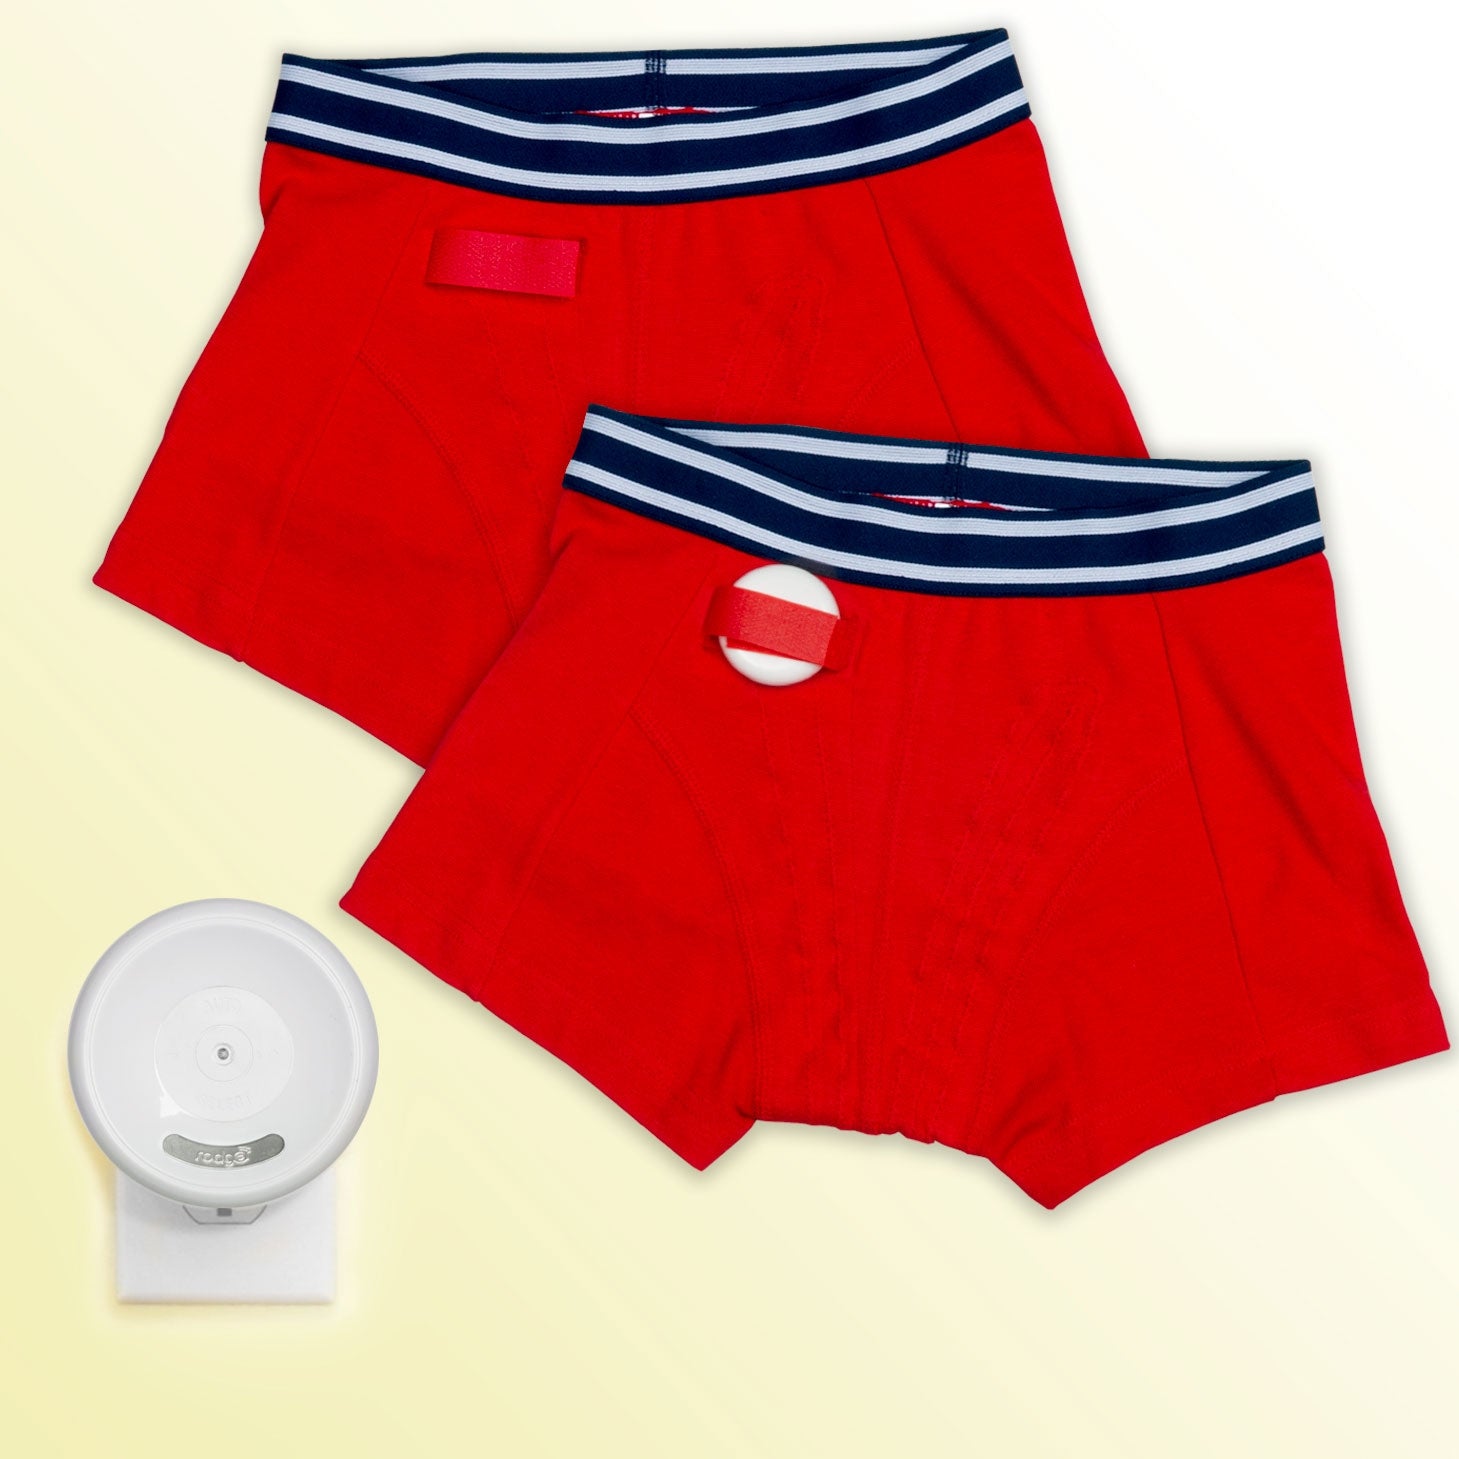 Alarms-Rodger Wireless Bedwetting Alarm System-Red Briefs only